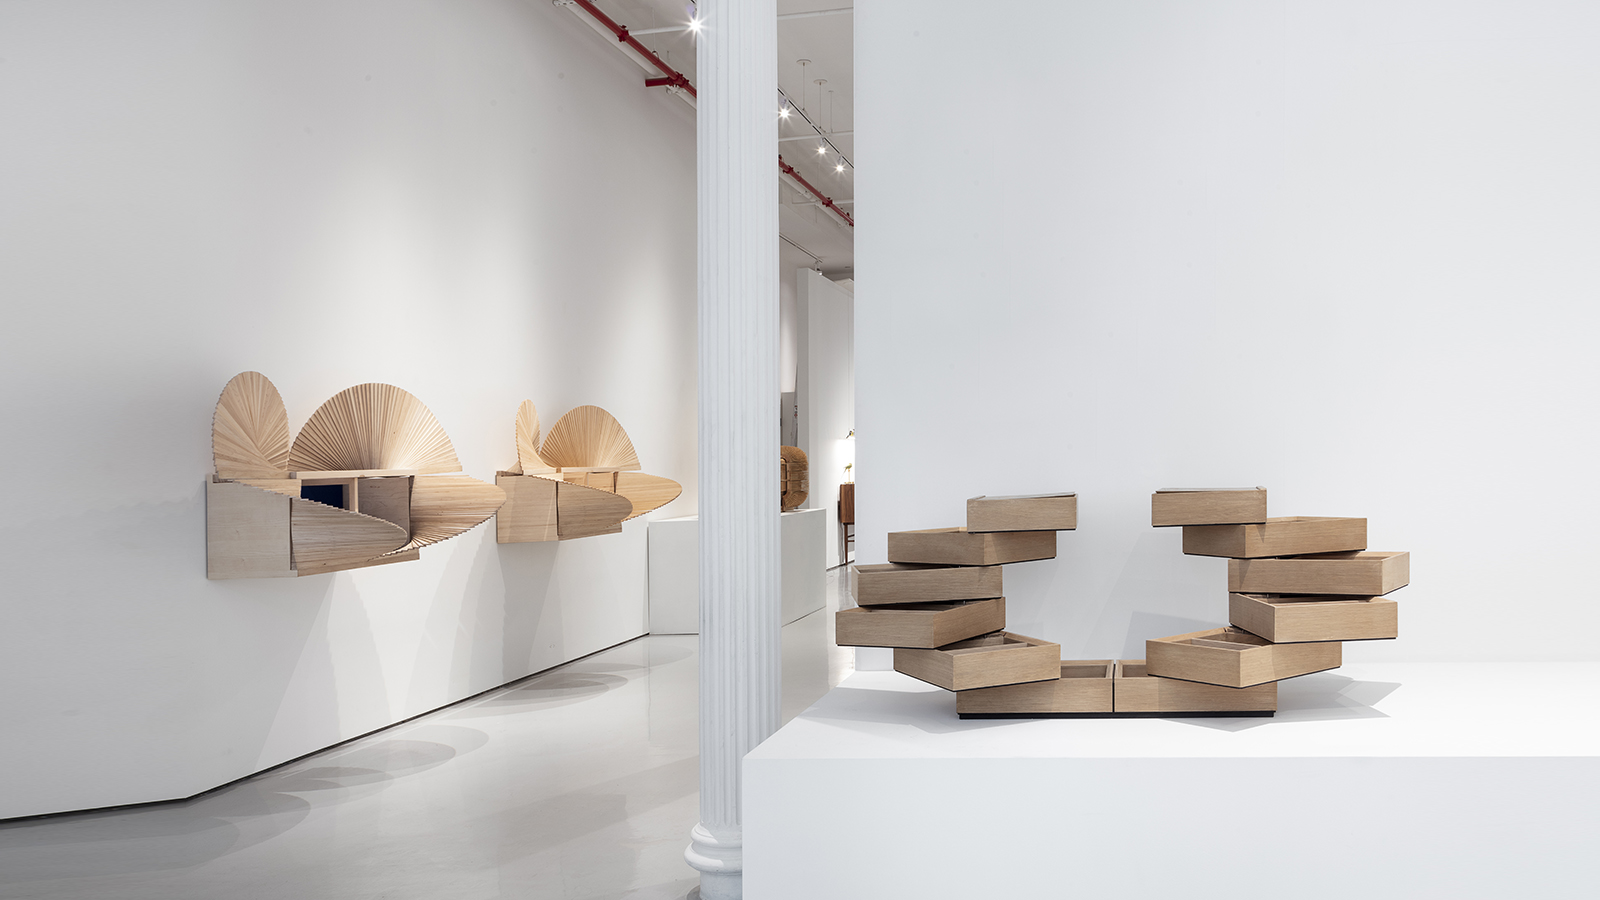 Sebastian ErraZuriz' The Spin Cabinet and Fan Cabinet on display at the R & Company gallery in New York City. 